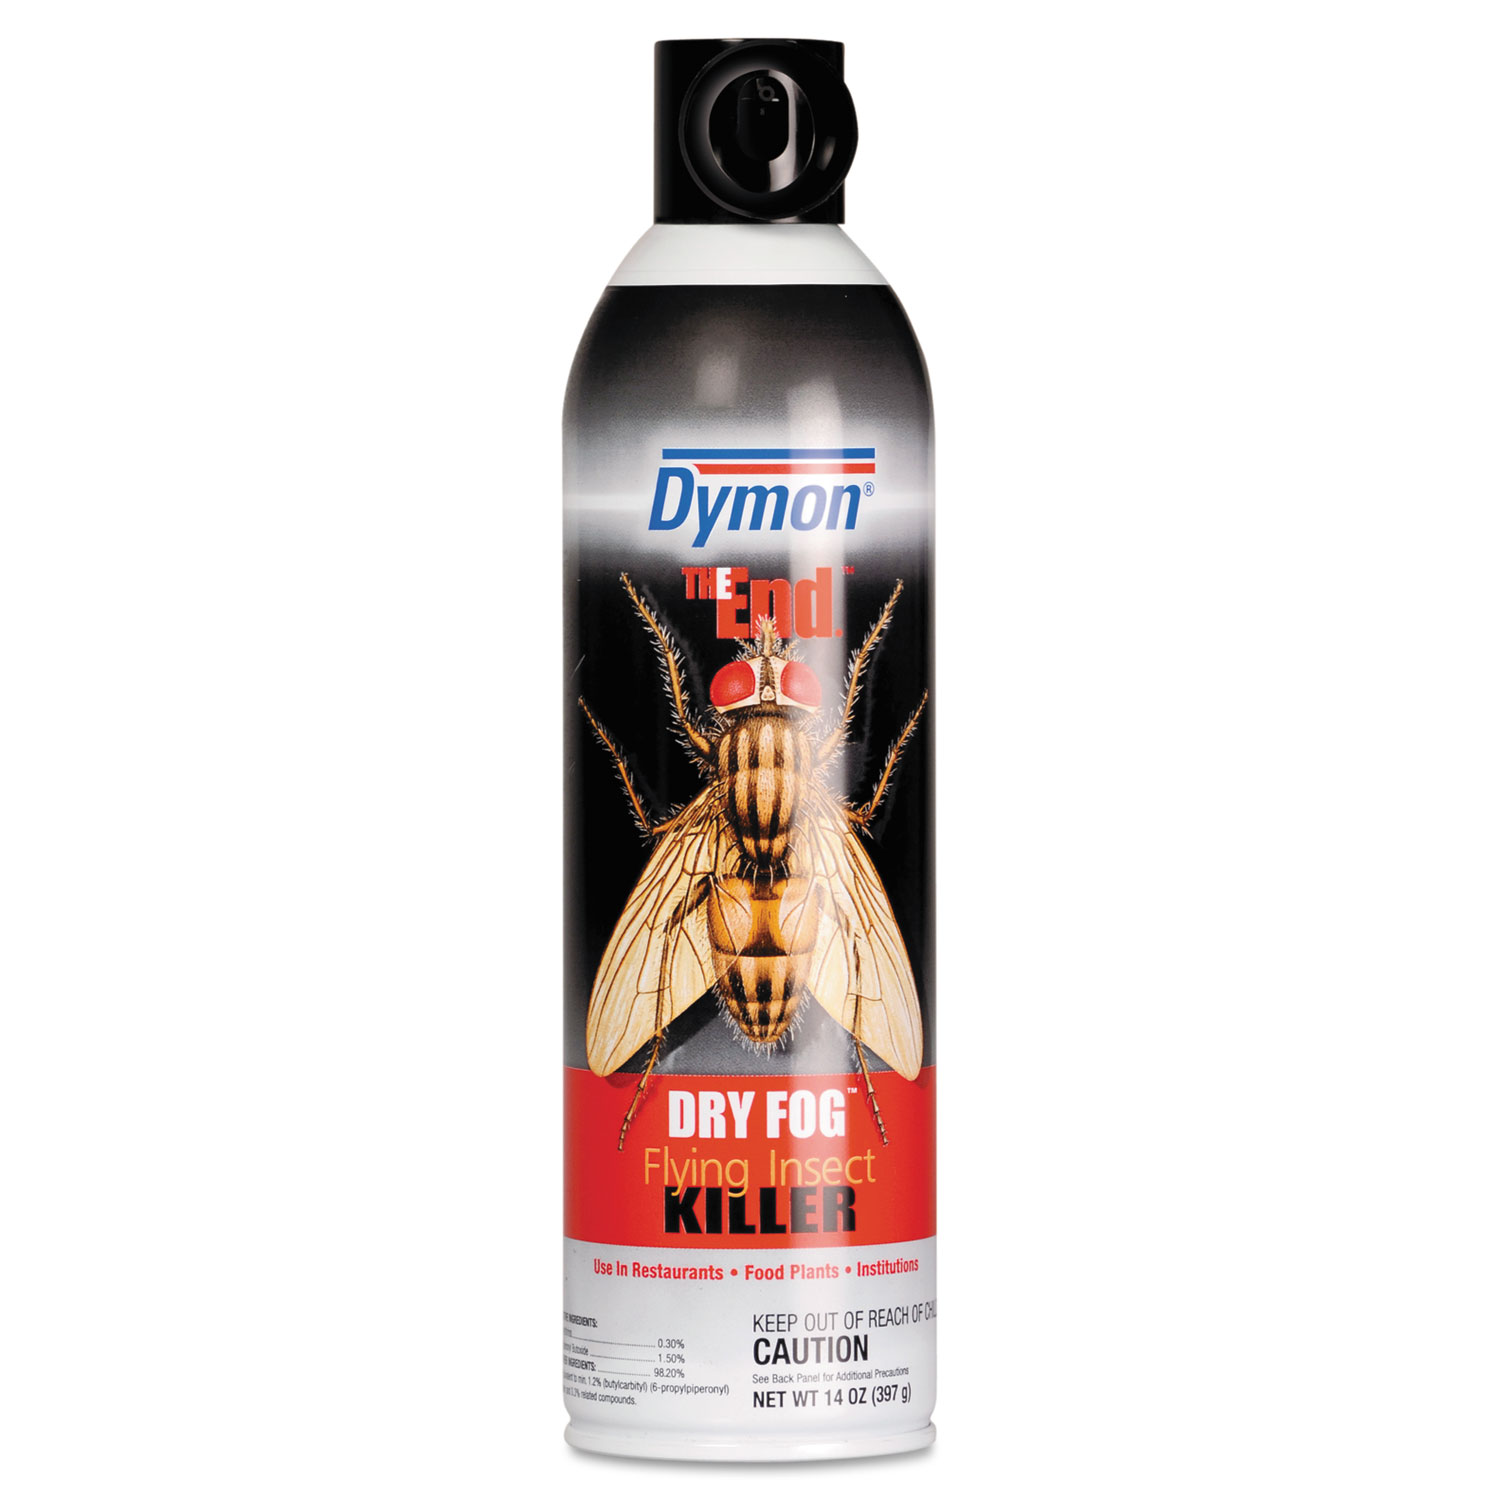  Dymon 45120 The End. Dry Fog Flying Insect Killer, 14oz, Can, 12/Carton (ITW45120) 